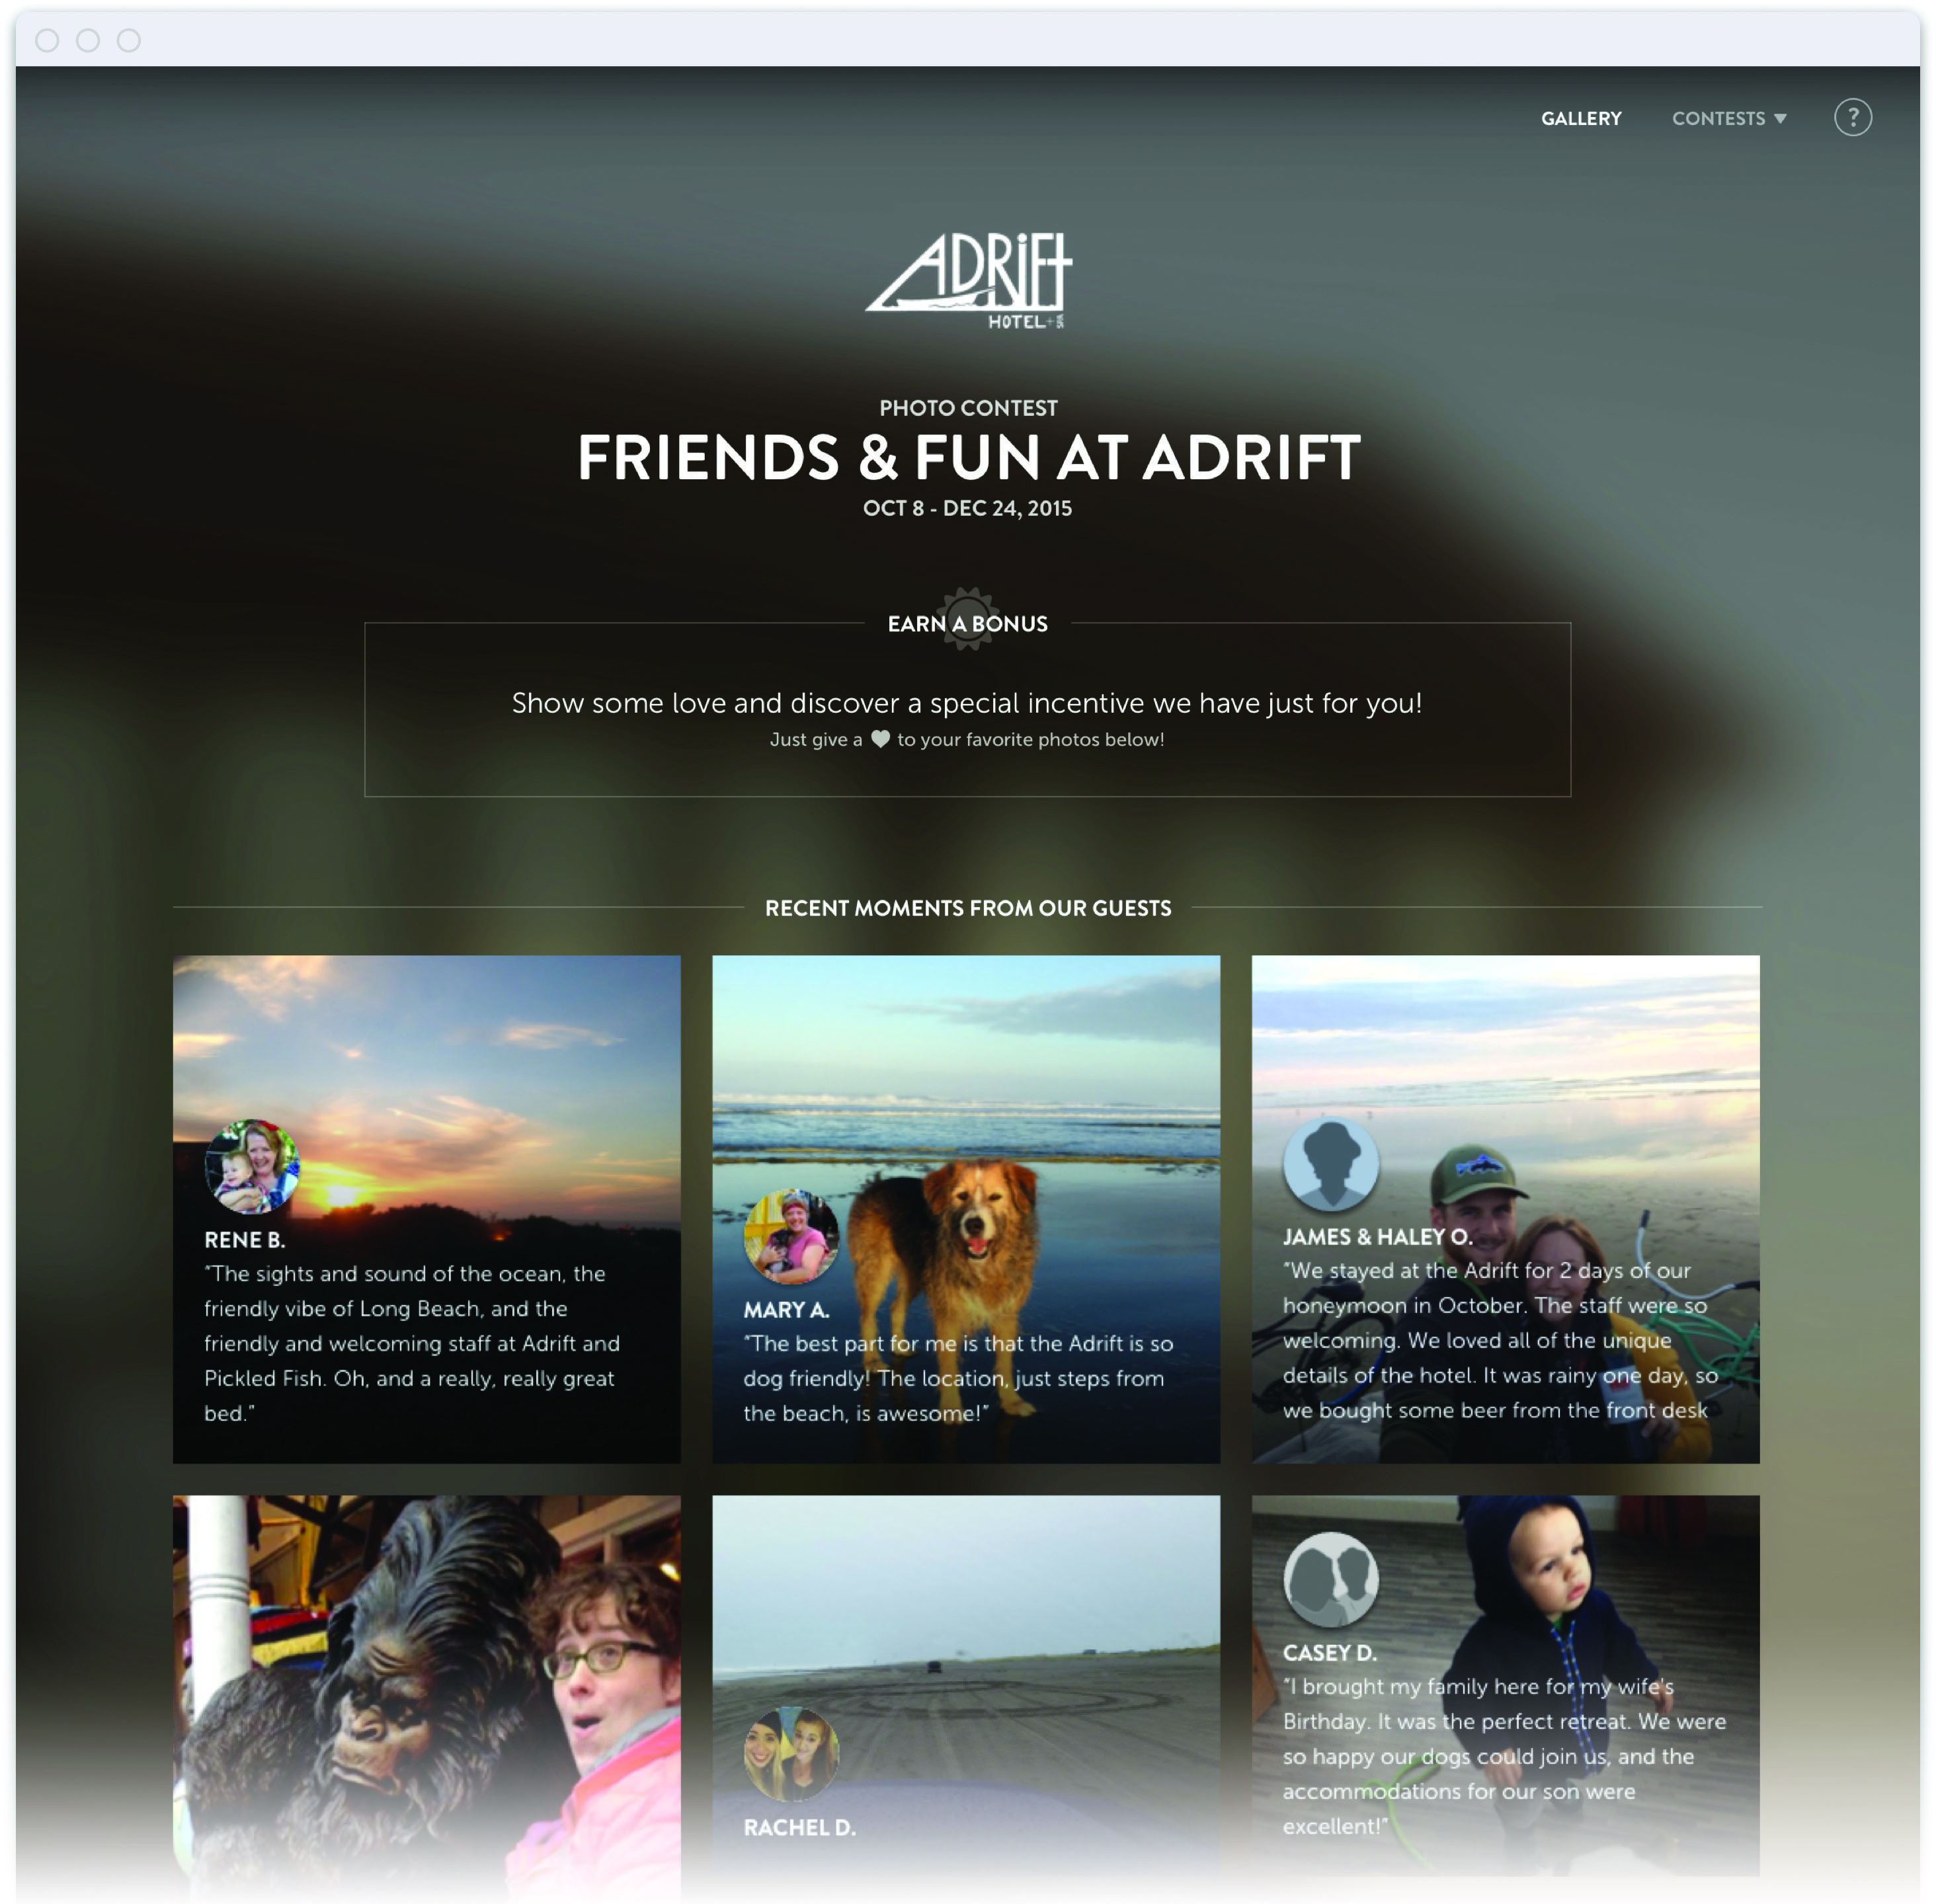 Adrift Hotel’s Photo Explorer turns memorable guest moments into highly engaging interactions with every type of site visitor.